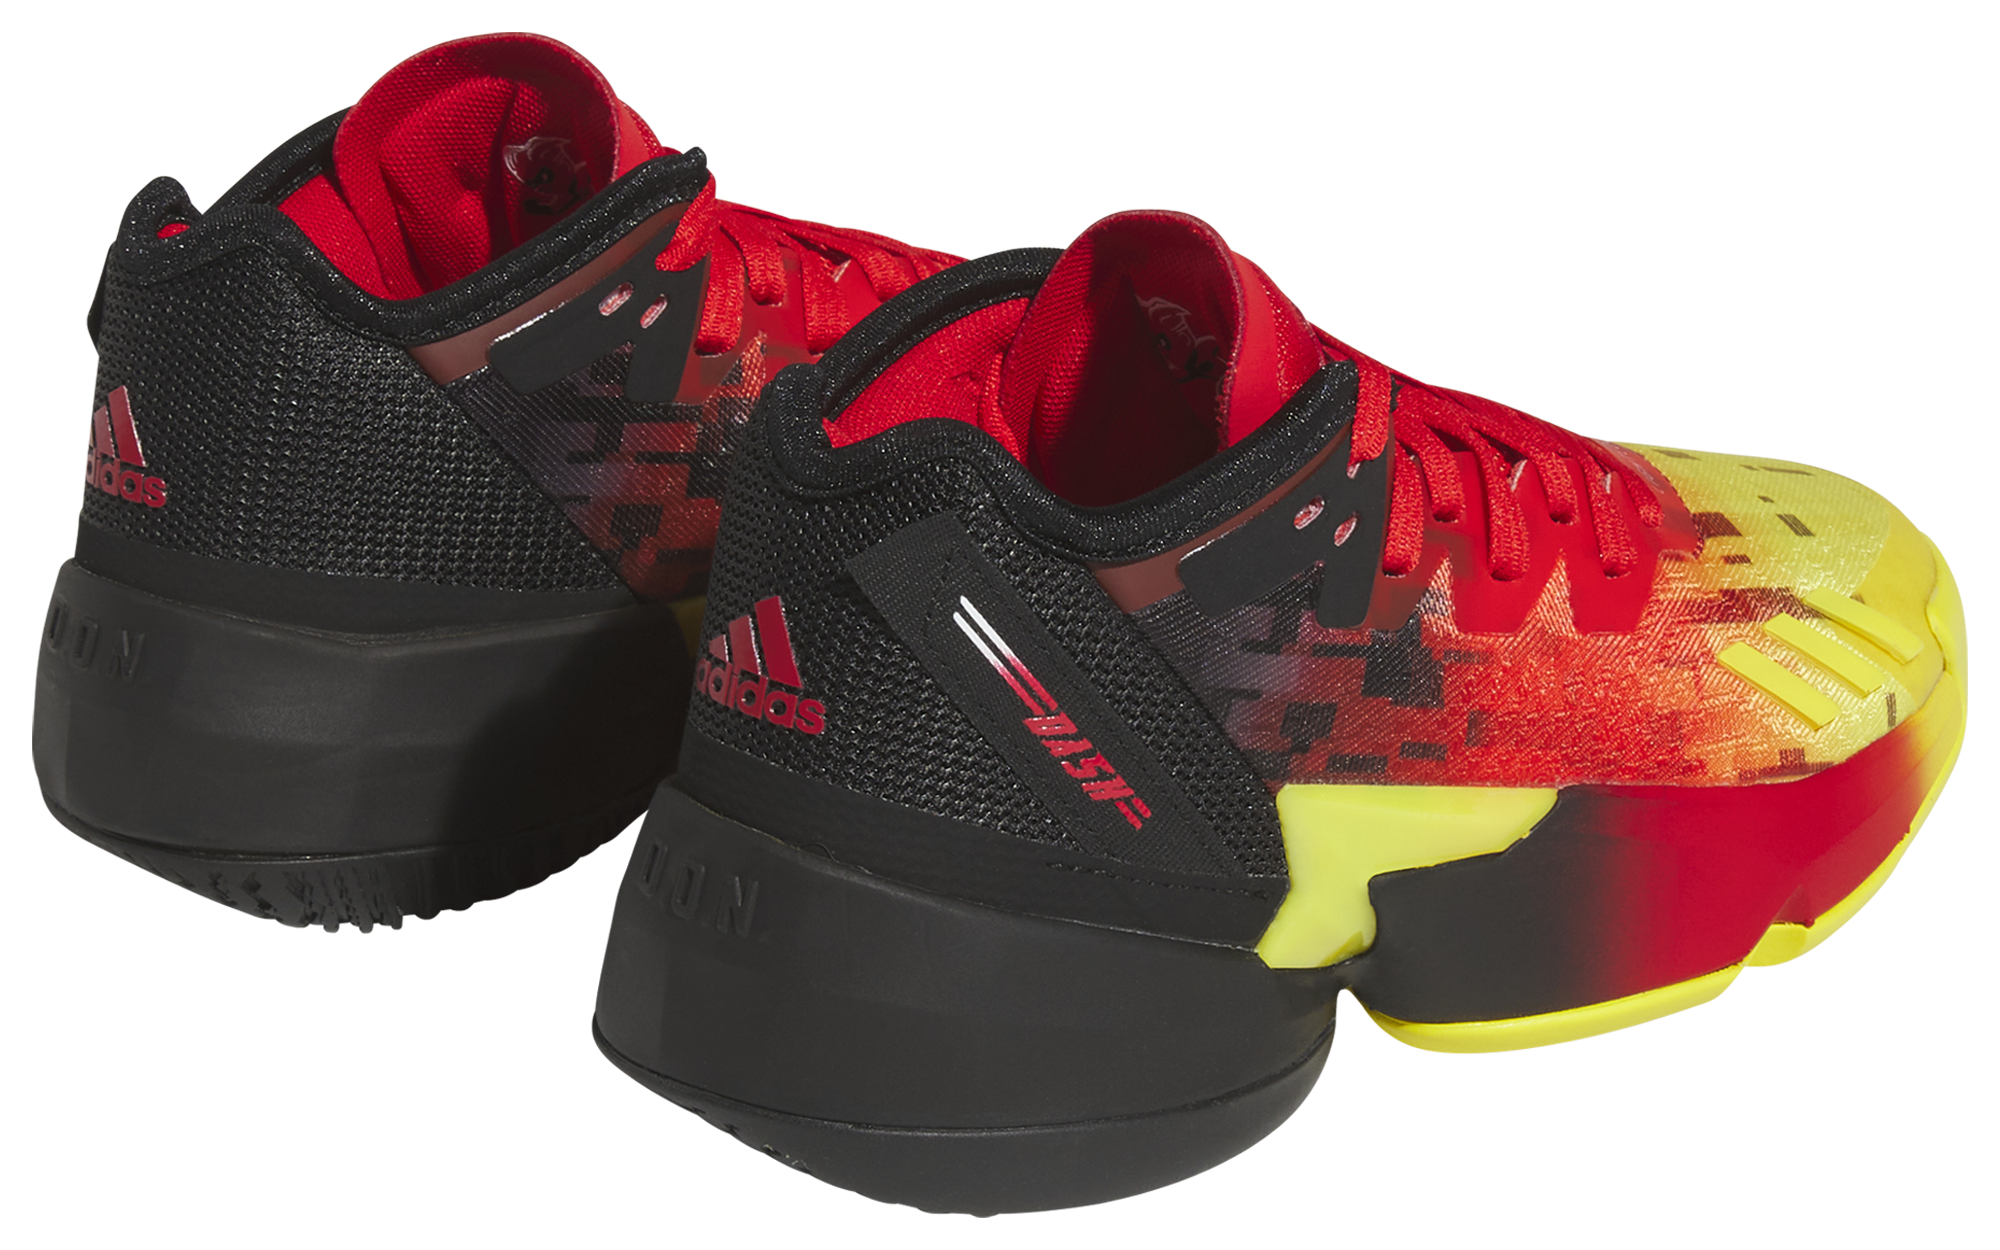 adidas D.O.N. Issue #4 Basketball Shoes